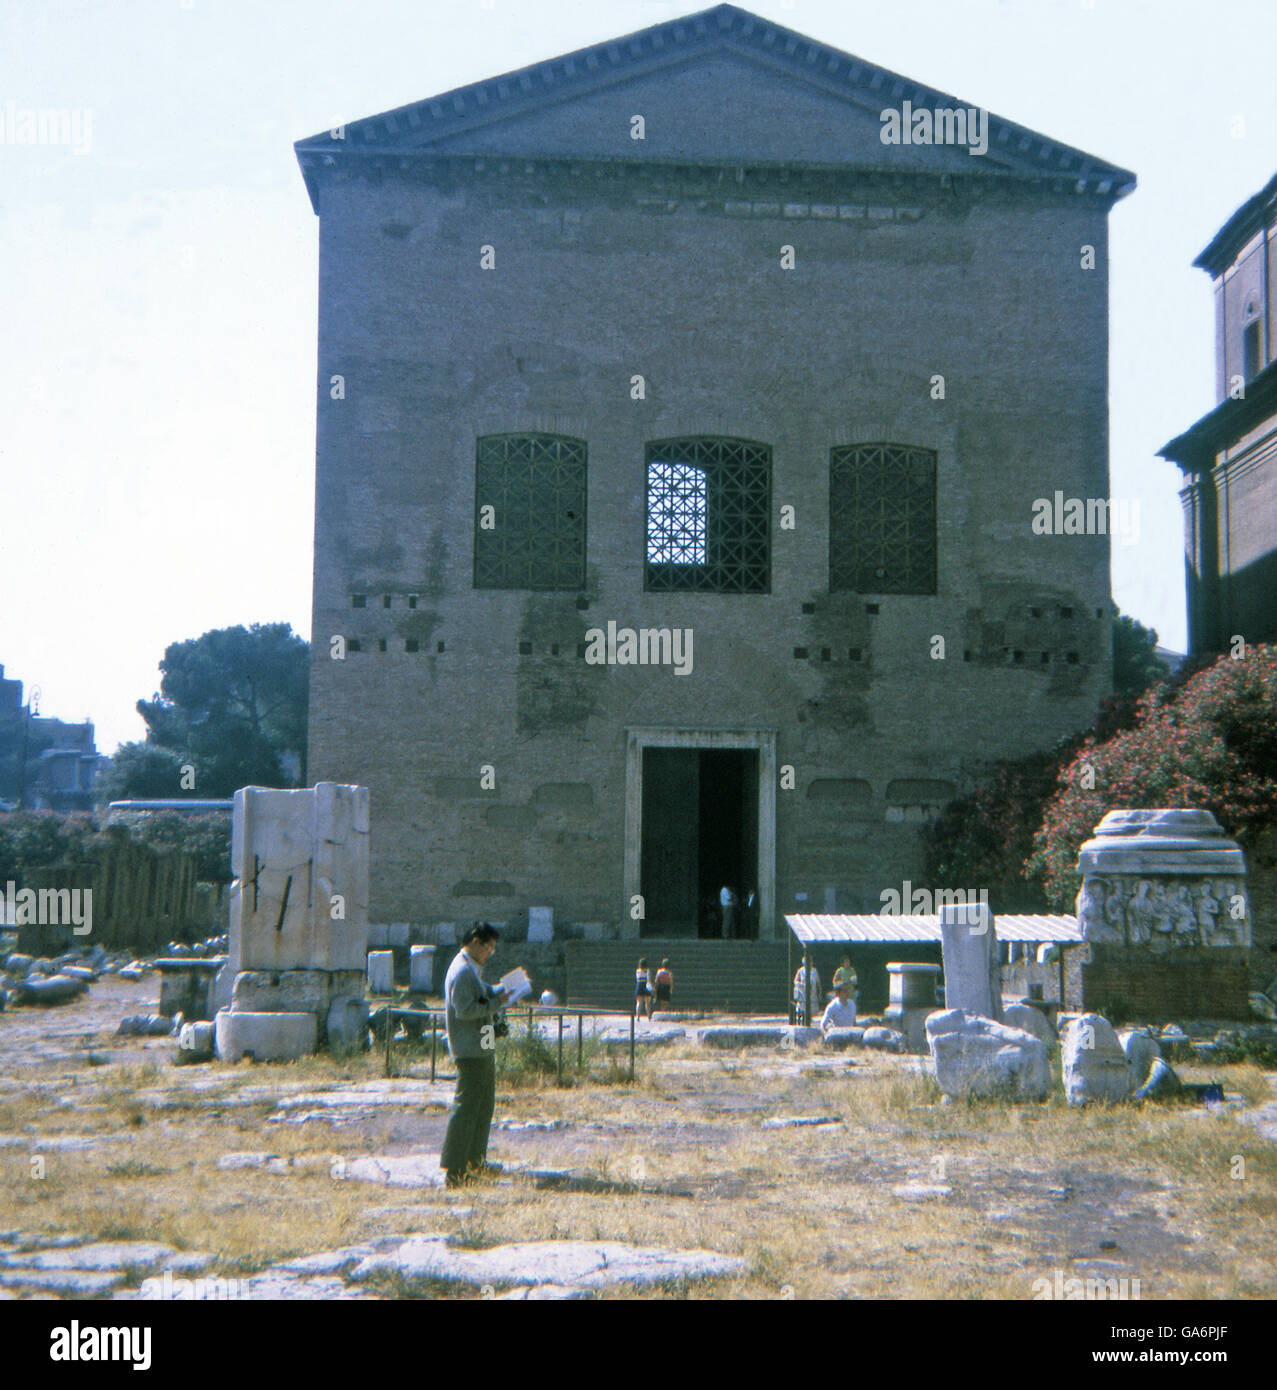 This 1970 photo shows the curia, or Roman Senate House, in the Roman Forum in Rome, Italy. It dates to the time of Julius Caesar and was built the year of his assassination - 44 B.C. Because of the murder, construction was interrupted. It was completed under Caesar's successor - Augustus— in 29 B.C. Located here, under the corrugated metal roofing to the left in front of the curia, is the Lapis Niger, an ancient shrine that was believed to date back to the time when kings ruled Rome (the Republic started in 509 B.C.). Stock Photo